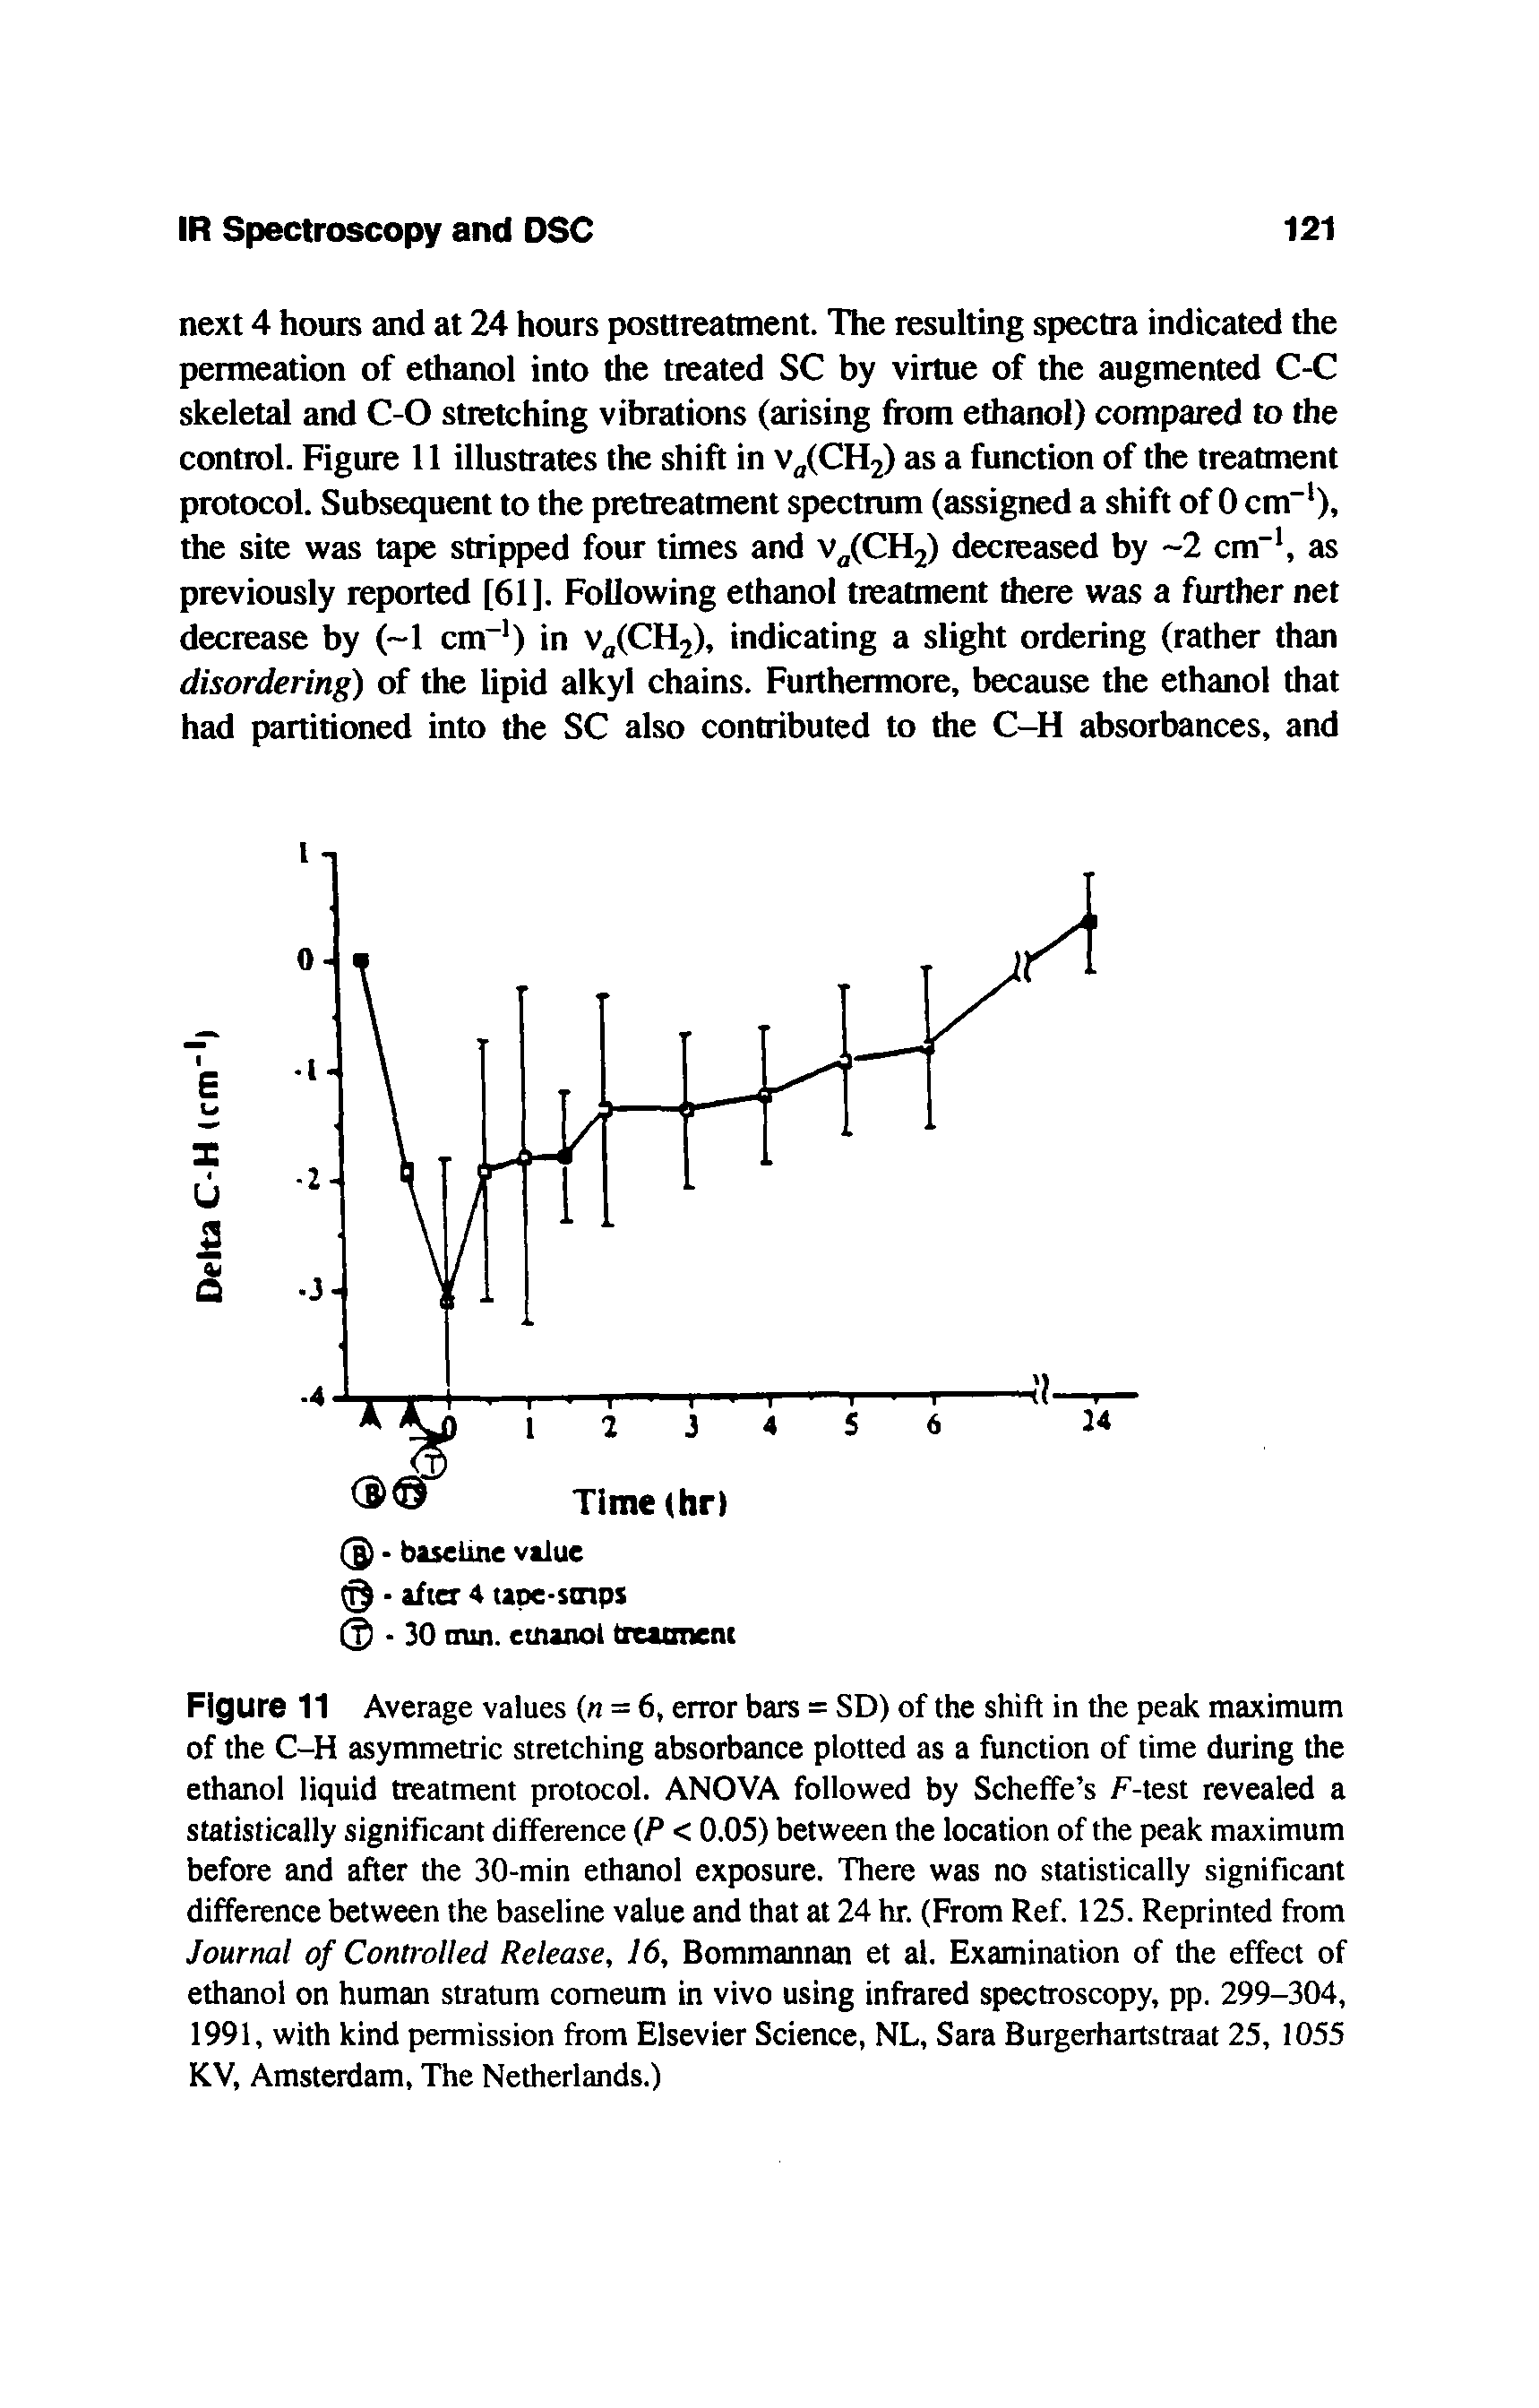 Figure 11 Average values (n = 6, error bars = SD) of the shift in the peak maximum of the C-H asymmetric stretching absorbance plotted as a function of time during the ethanol liquid treatment protocol. ANOVA followed by Scheffe s F-test revealed a statistically significant difference P < 0.05) between the location of the peak maximum before and after the 30-min ethanol exposure. There was no statistically significant difference between the baseline value and that at 24 hr. (From Ref. 125. Reprinted from Journal of Controlled Release, 16, Bommannan et al. Examination of the effect of ethanol on human stratum comeum in vivo using infrared spectroscopy, pp. 299-304, 1991, with kind permission from Elsevier Science, NL, Sara Burgerhartstraat 25, 1055 KV, Amsterdam, The Netherlands.)...